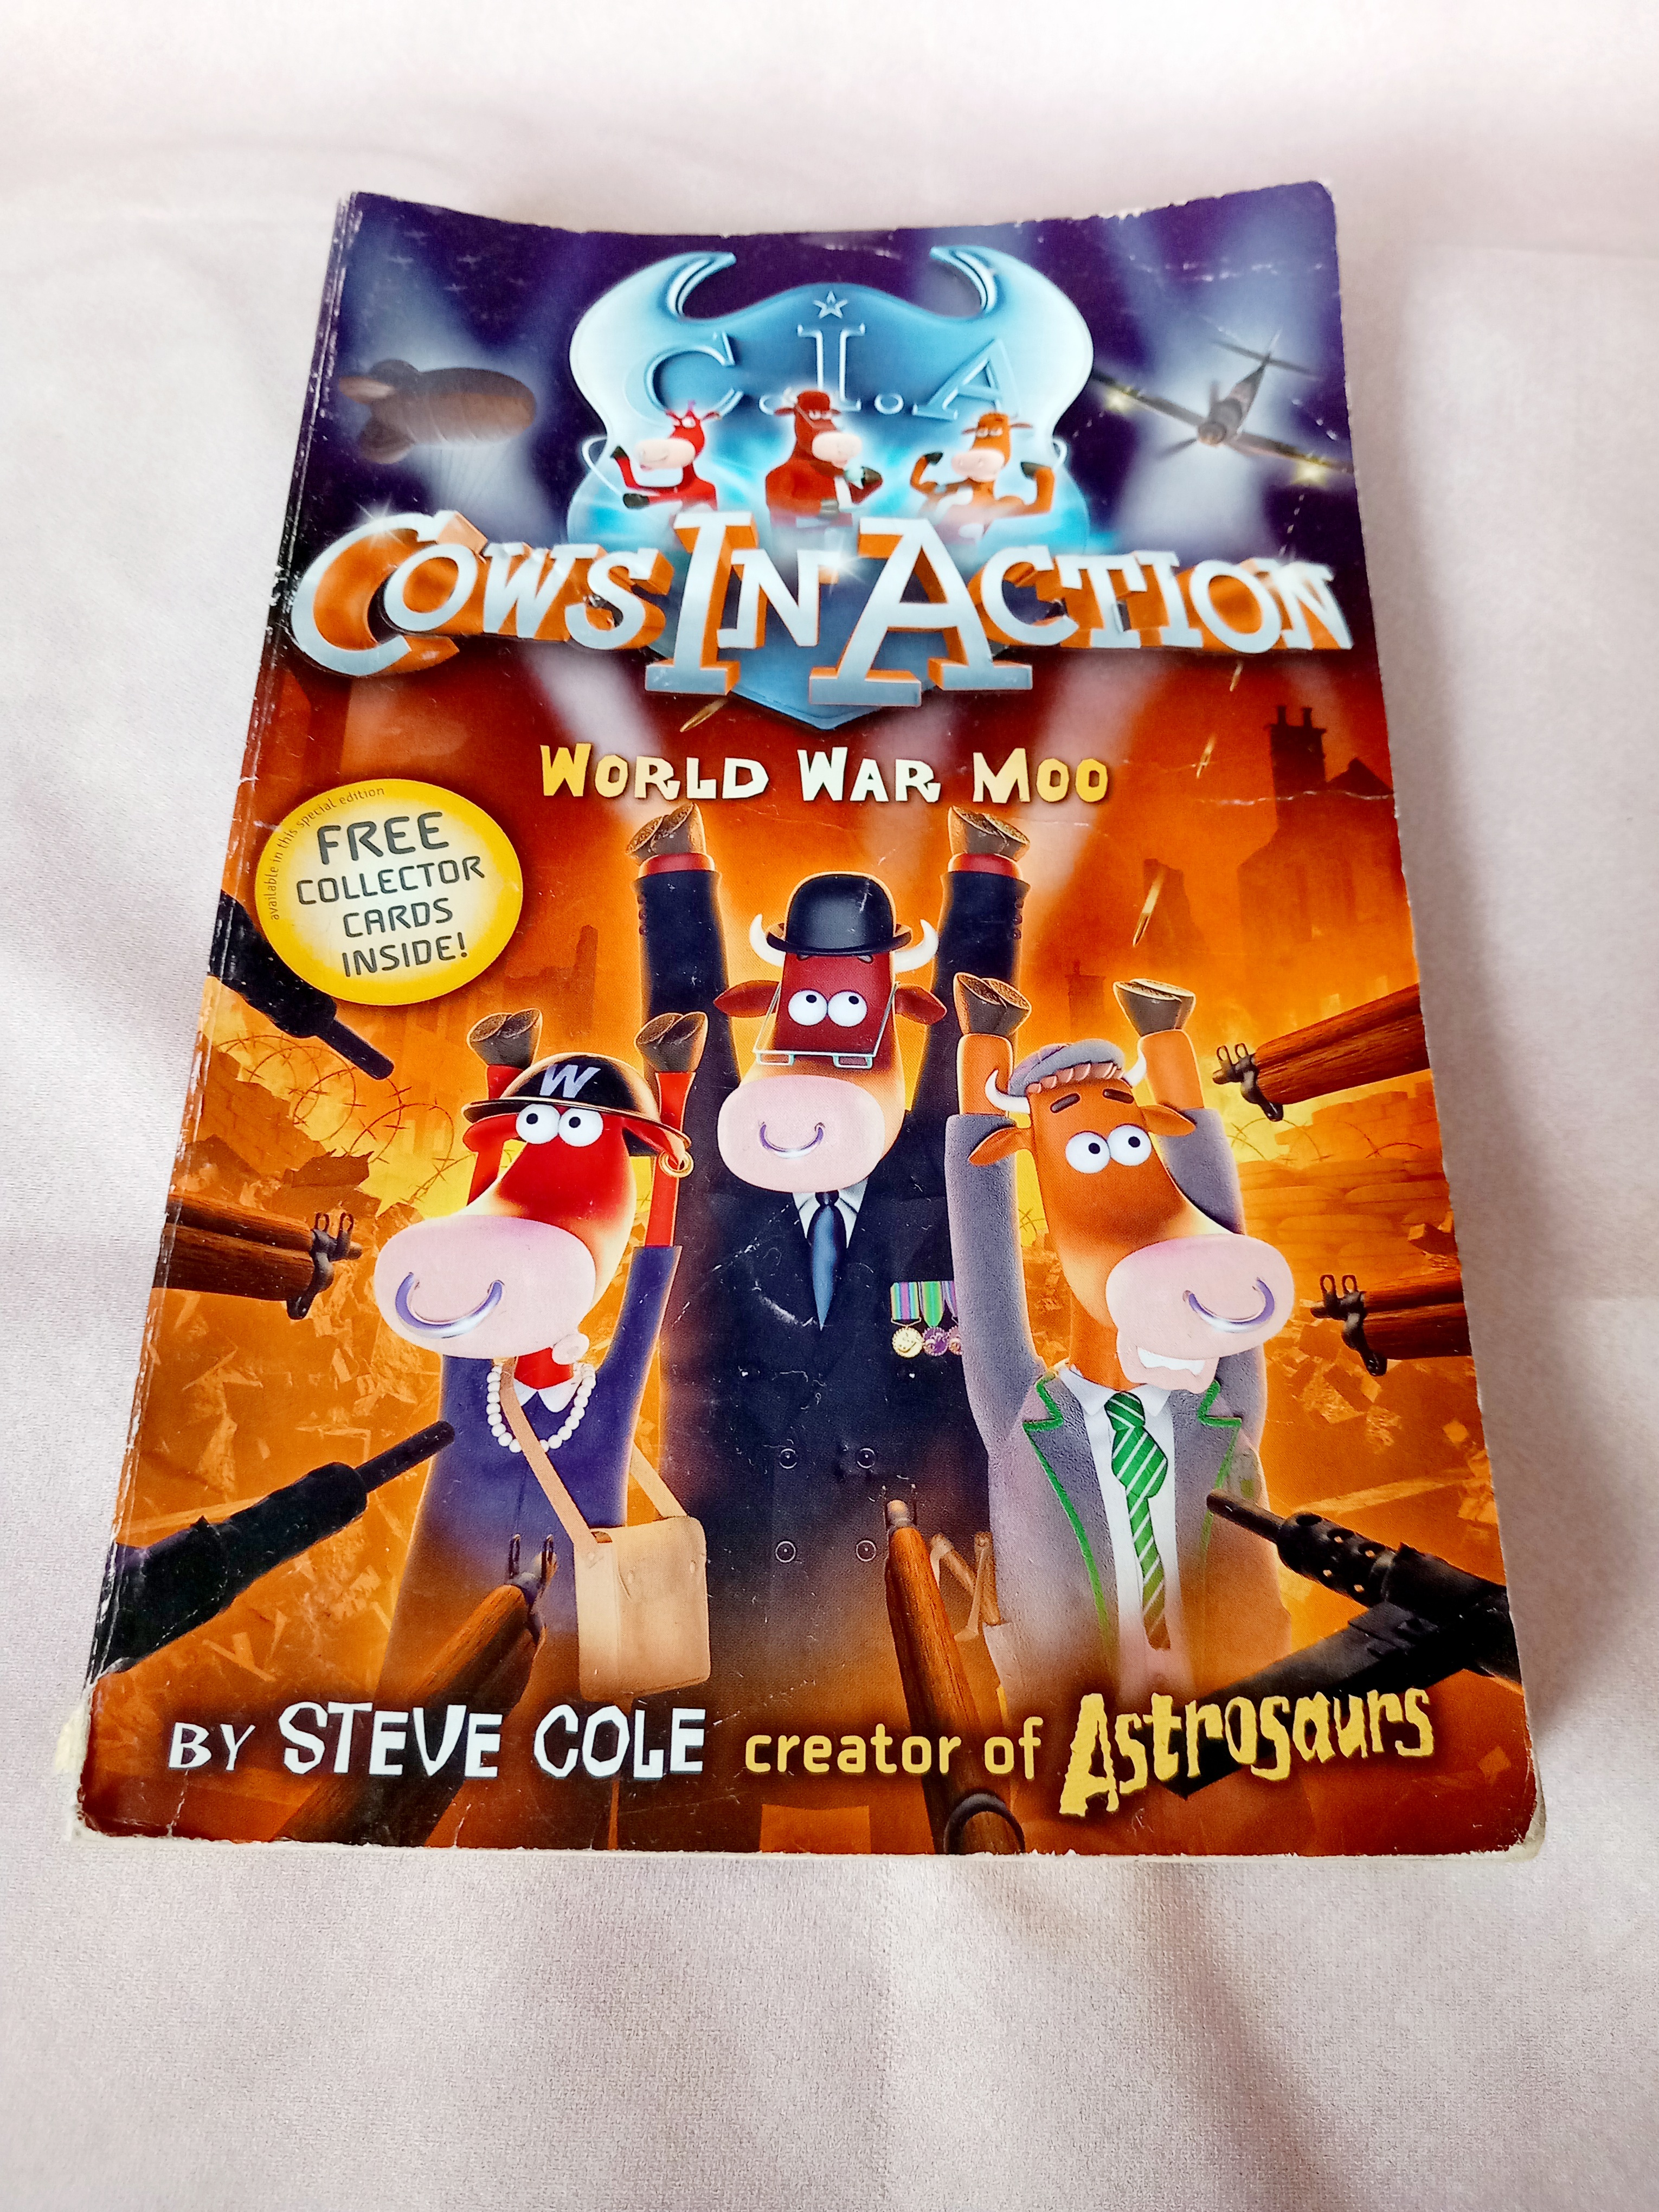 Cows in Action - World War Moo - Steve Cole